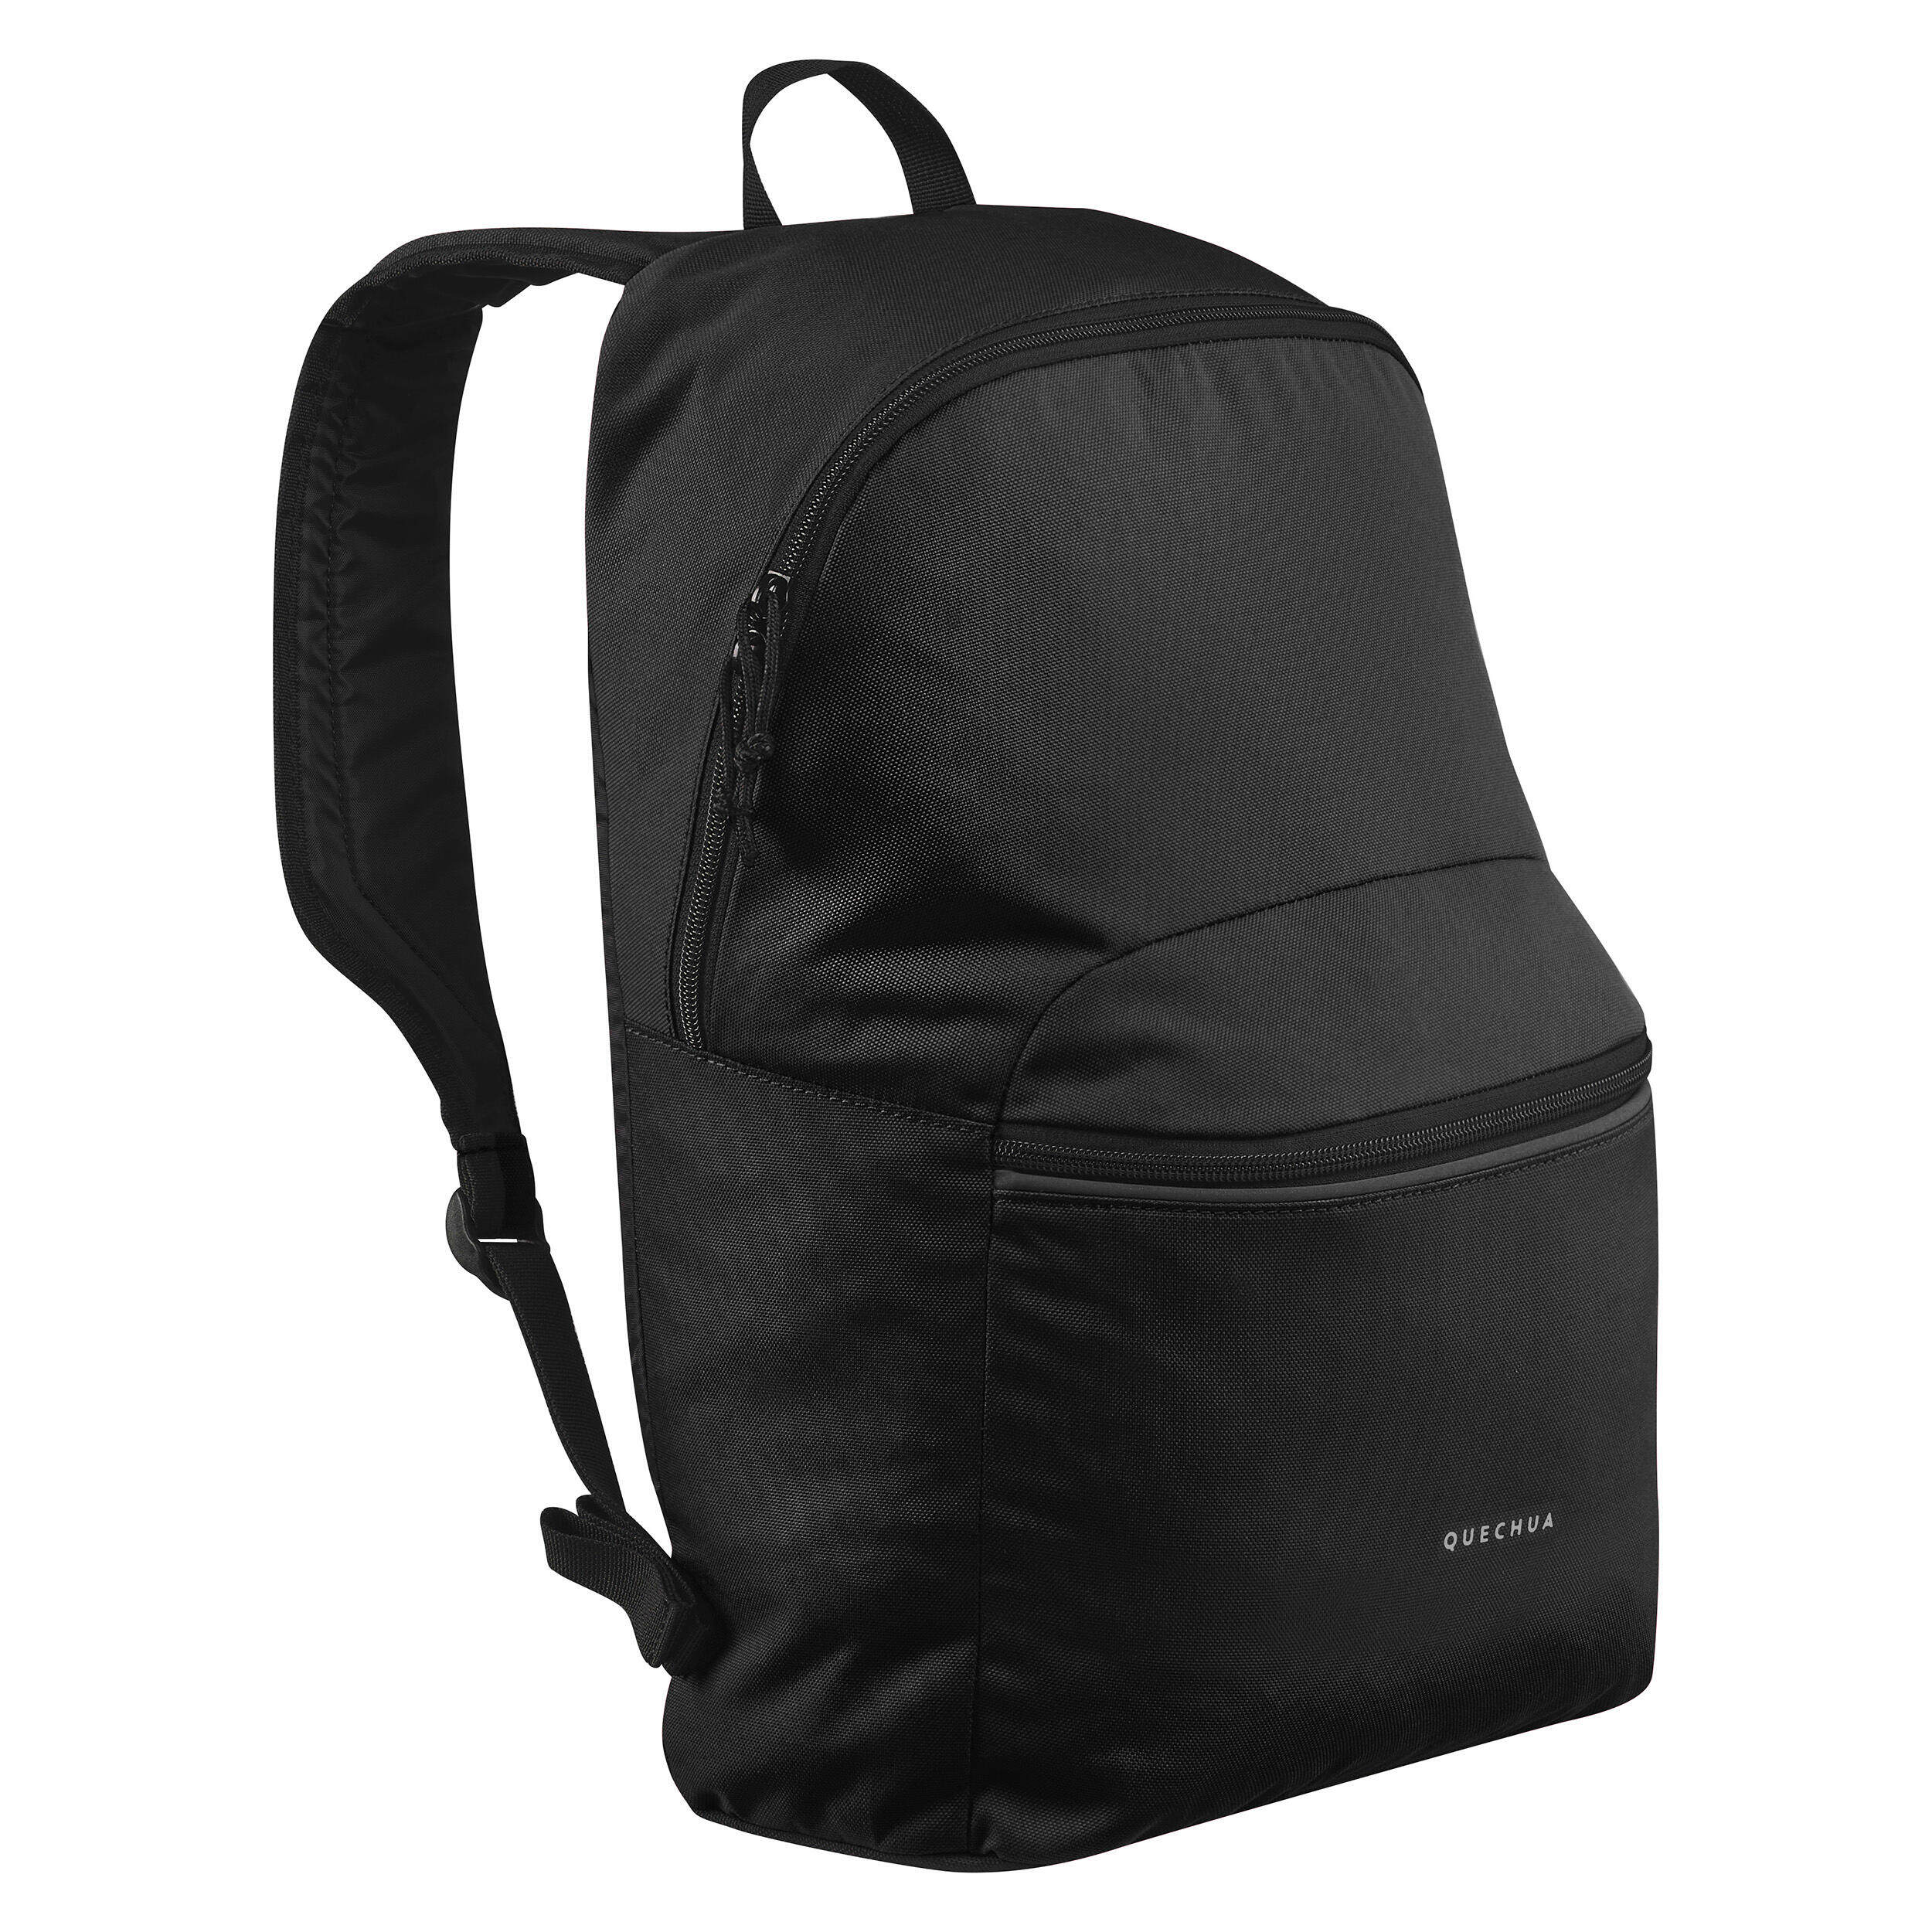 Synthetic Black Quechua Arpenaz NH100 10L Hiking Backpack, Number Of  Compartments: 1 Compartments